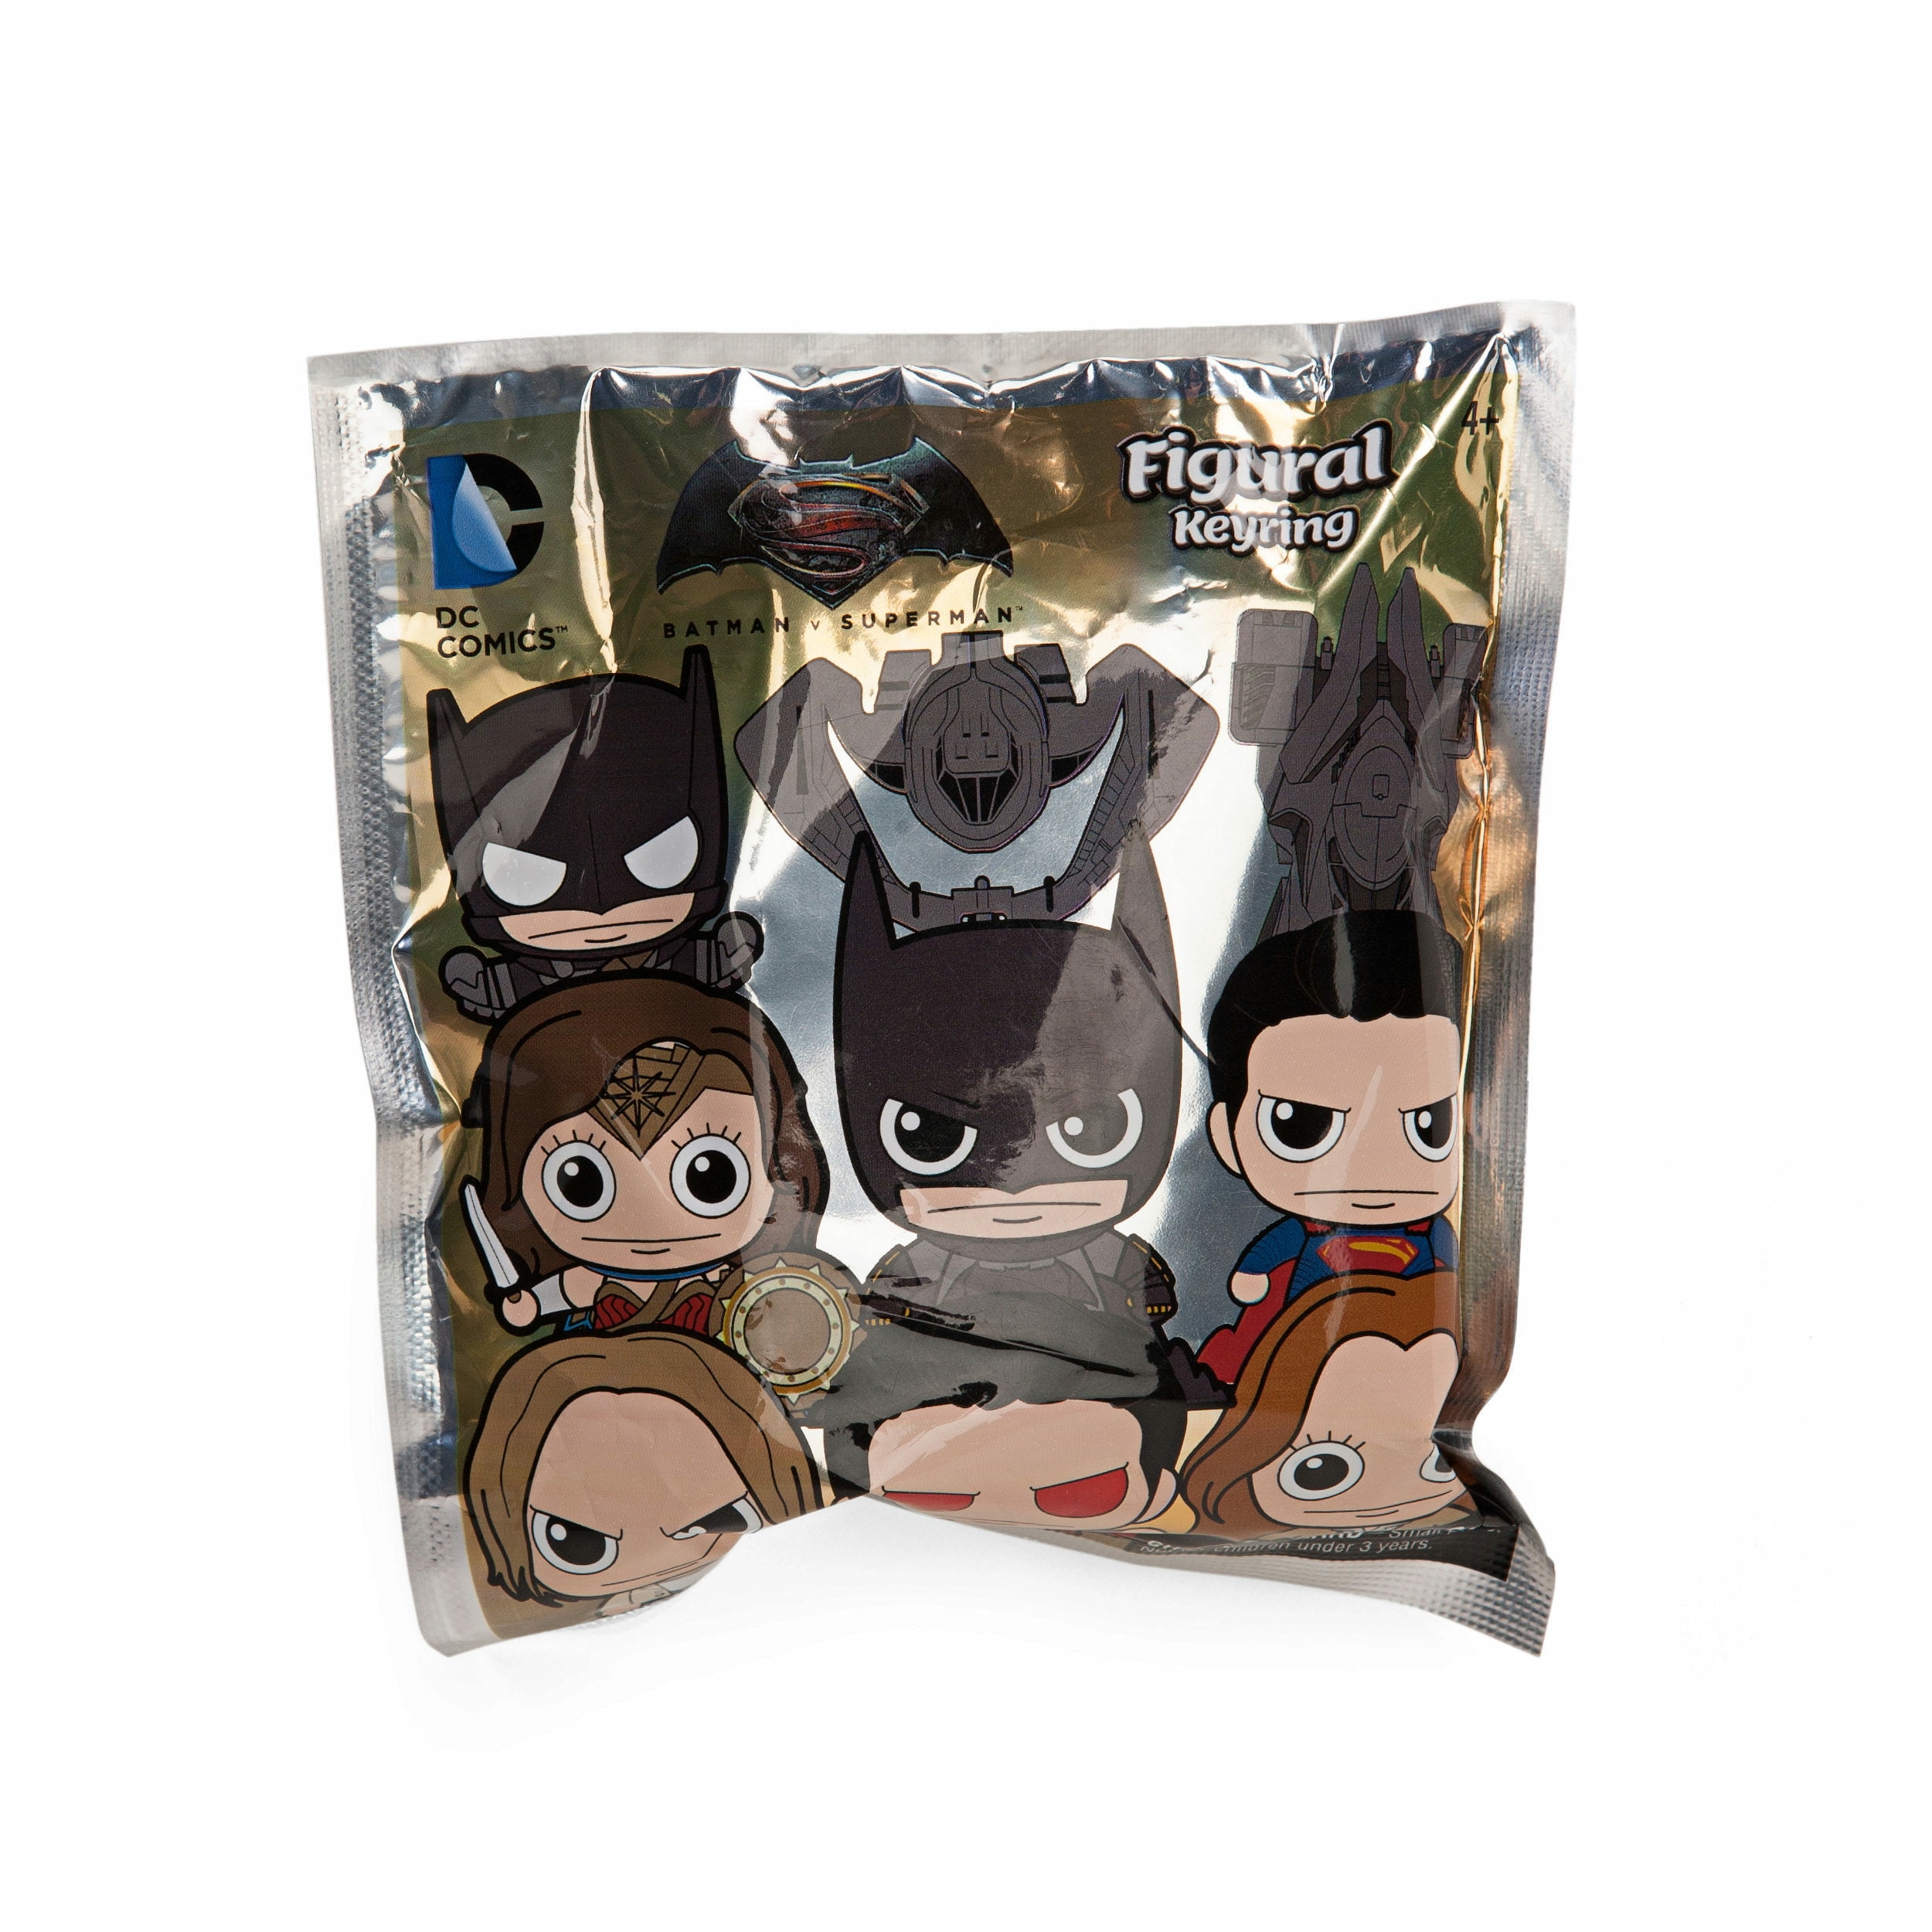 JUSTICE LEAGUE KEYCHAIN 14 Variations To Choose From New And Bagged No Box